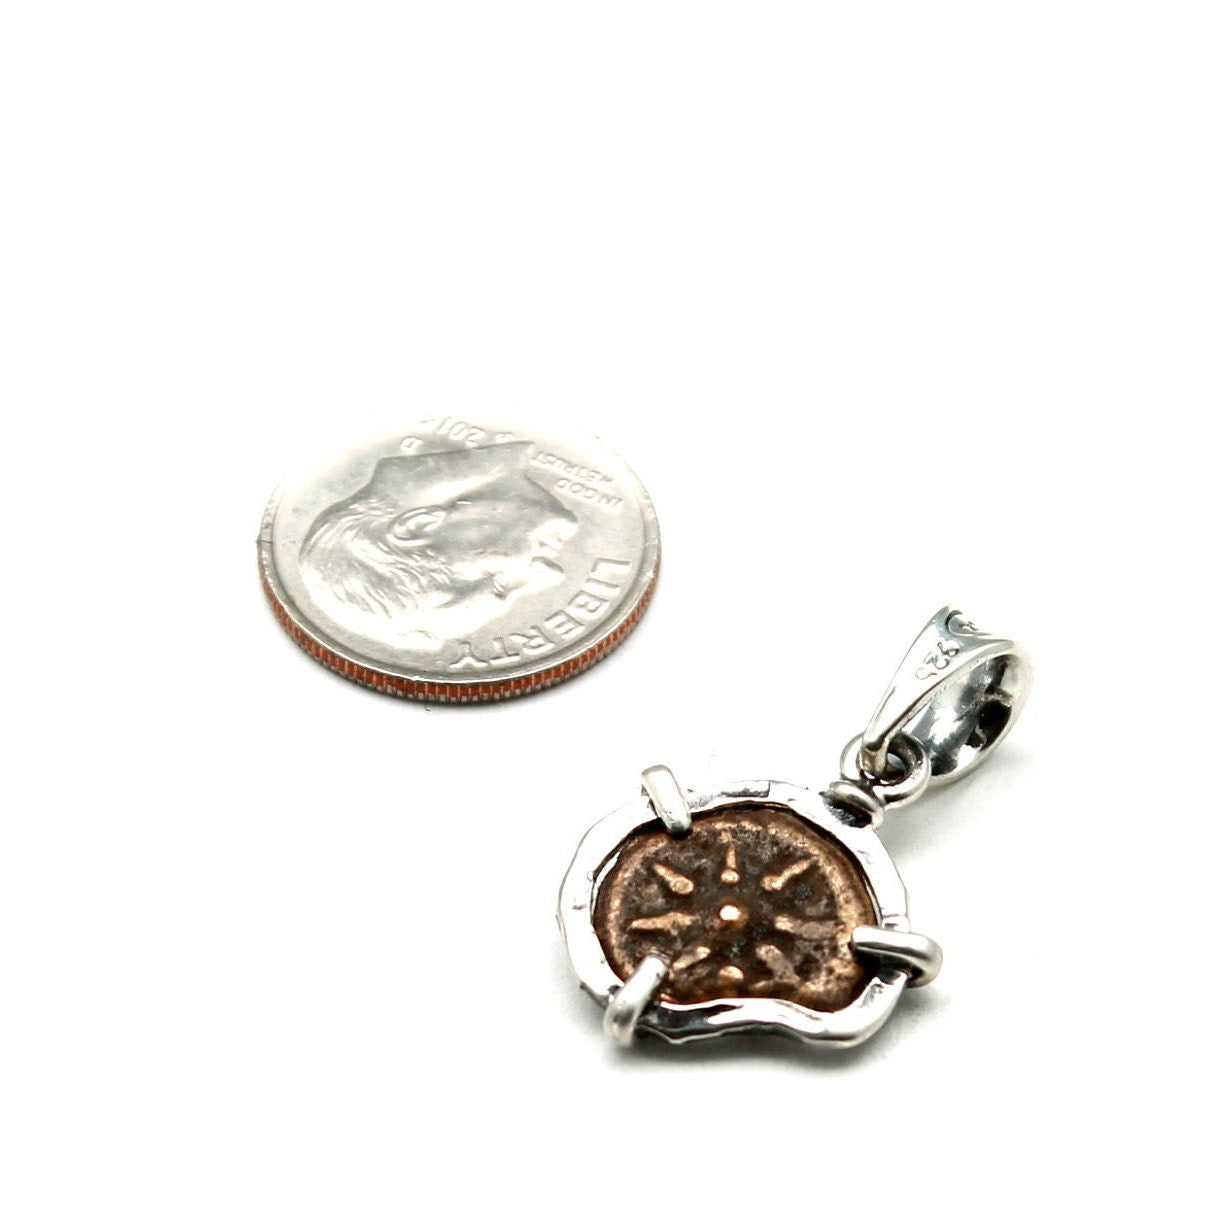 Sterling Silver Pendant, Widows Mite, Genuine Ancient Prutah Coin, 7231